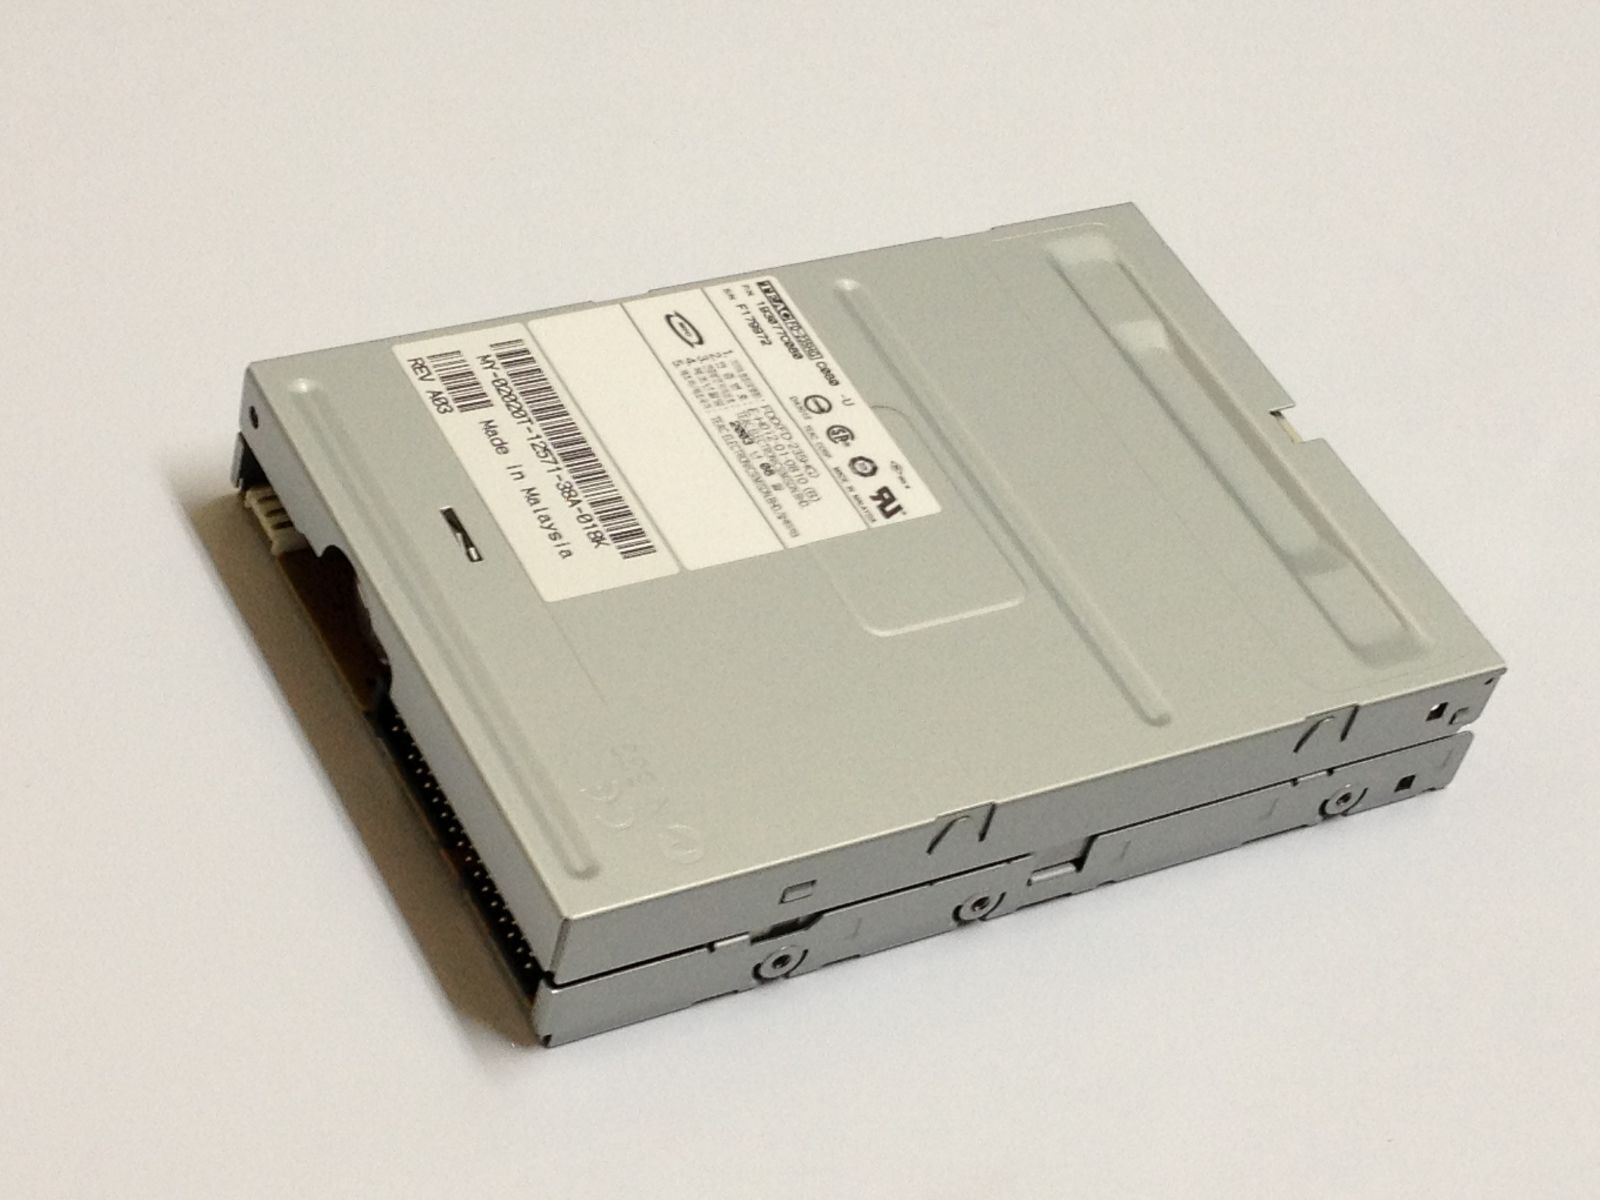 New Dell Dimension 4100 Floppy Disk Drive only no cable 2020T 